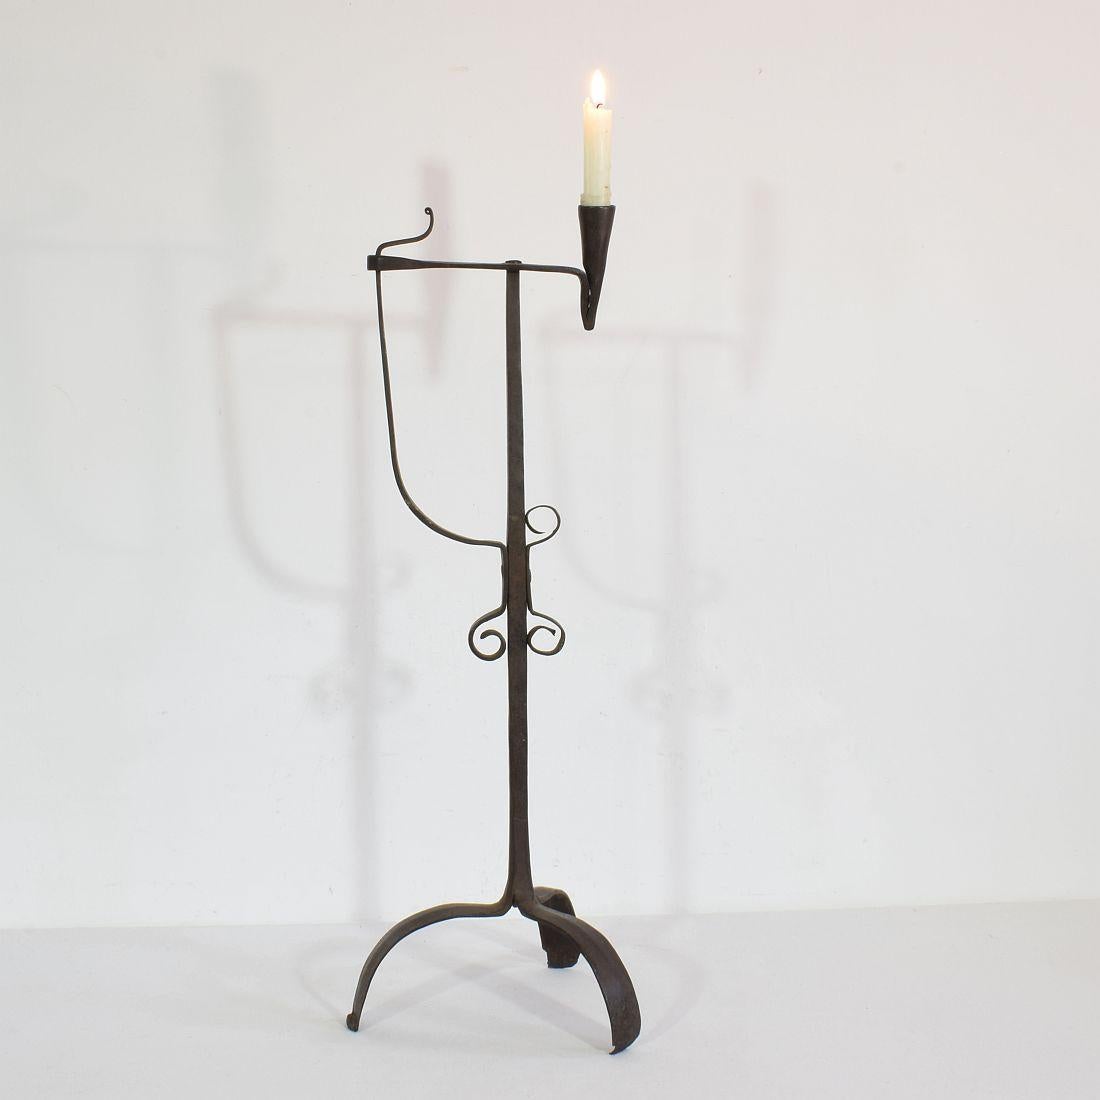 Very old and beautiful hand forged iron candleholder
France, circa 1700-1750. Weathered 